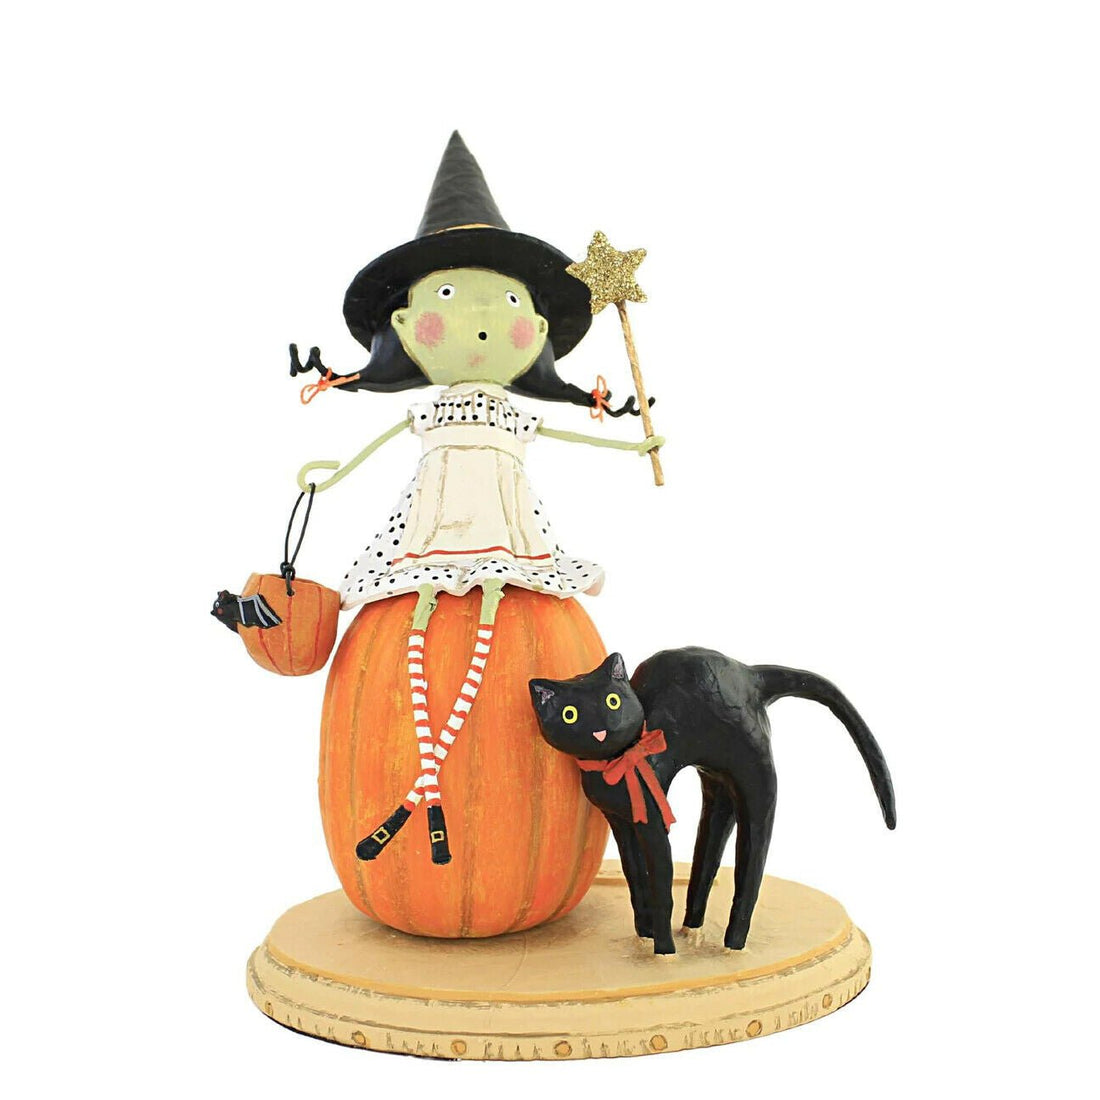 ESC Halloween Bewitched Black Cat and Witch Lori Mitchell 14474 - The Primitive Pineapple Collection